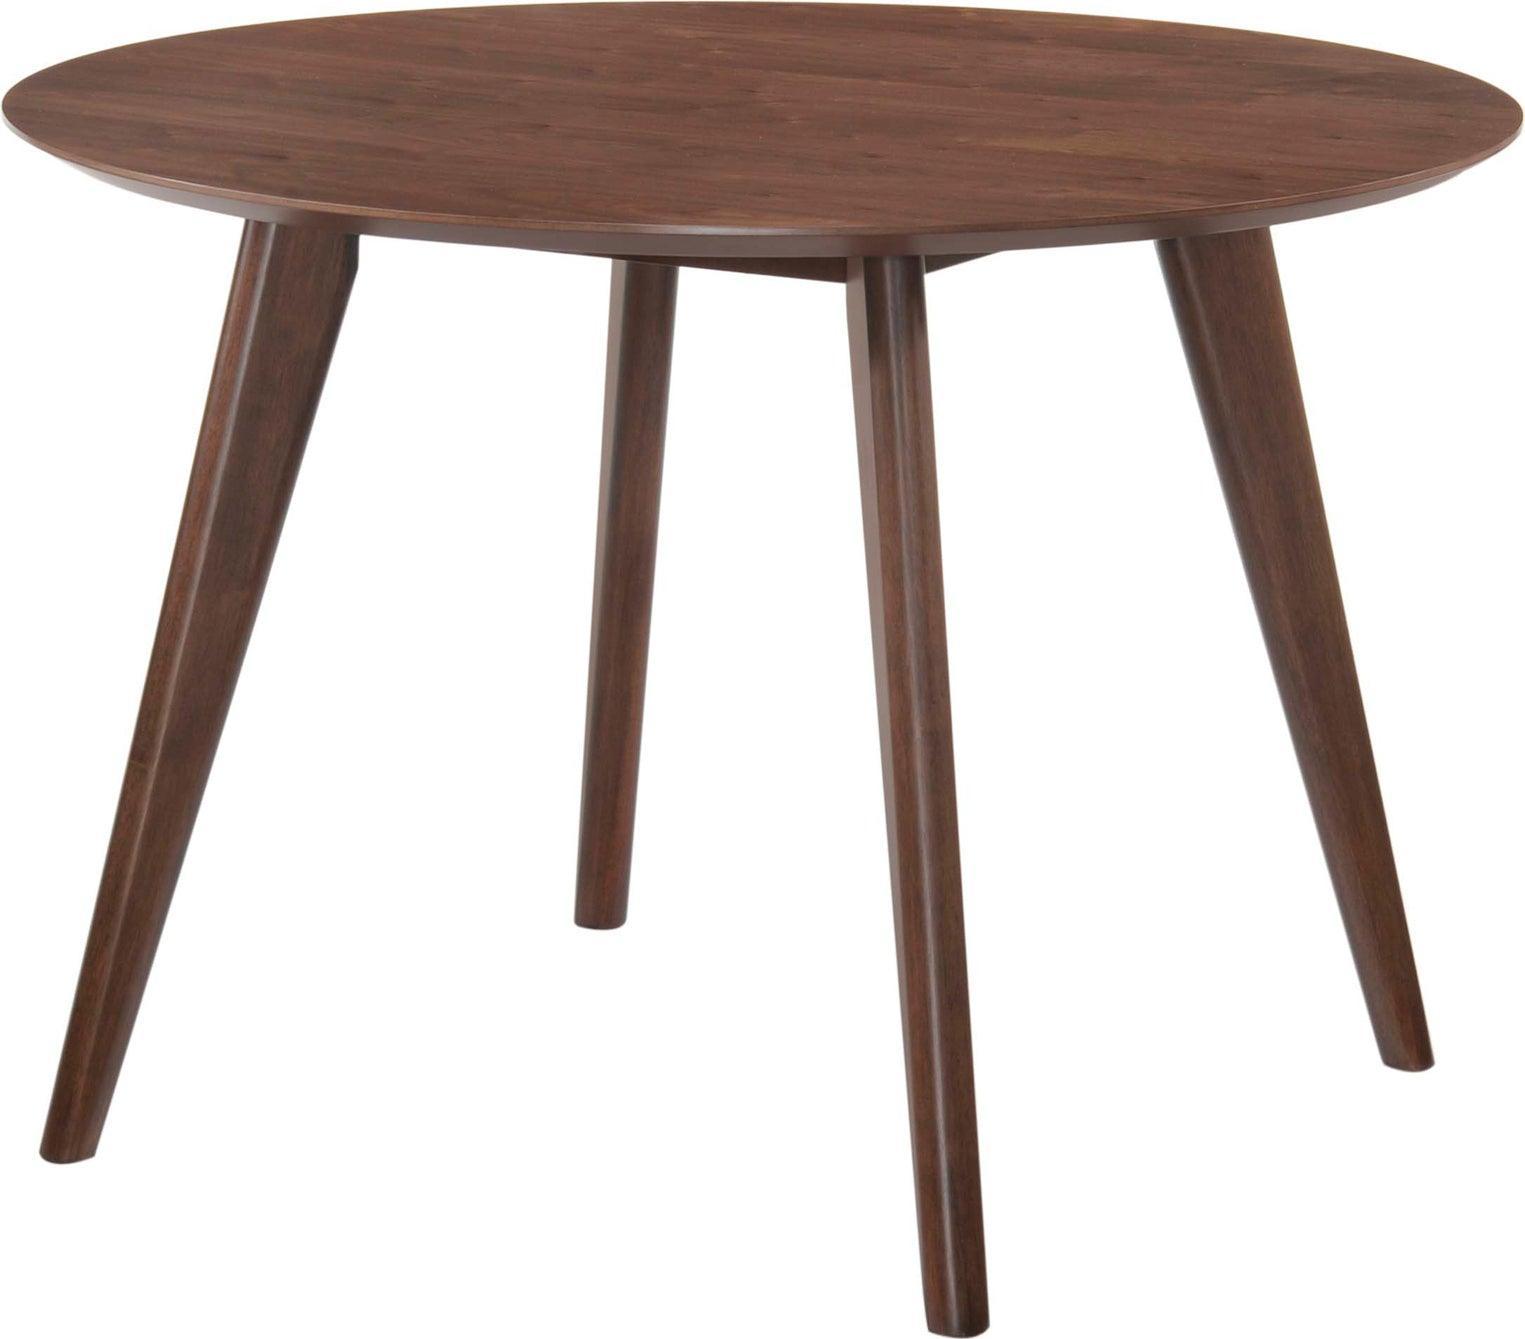 Elements Dining Tables - Rosie Dining Table